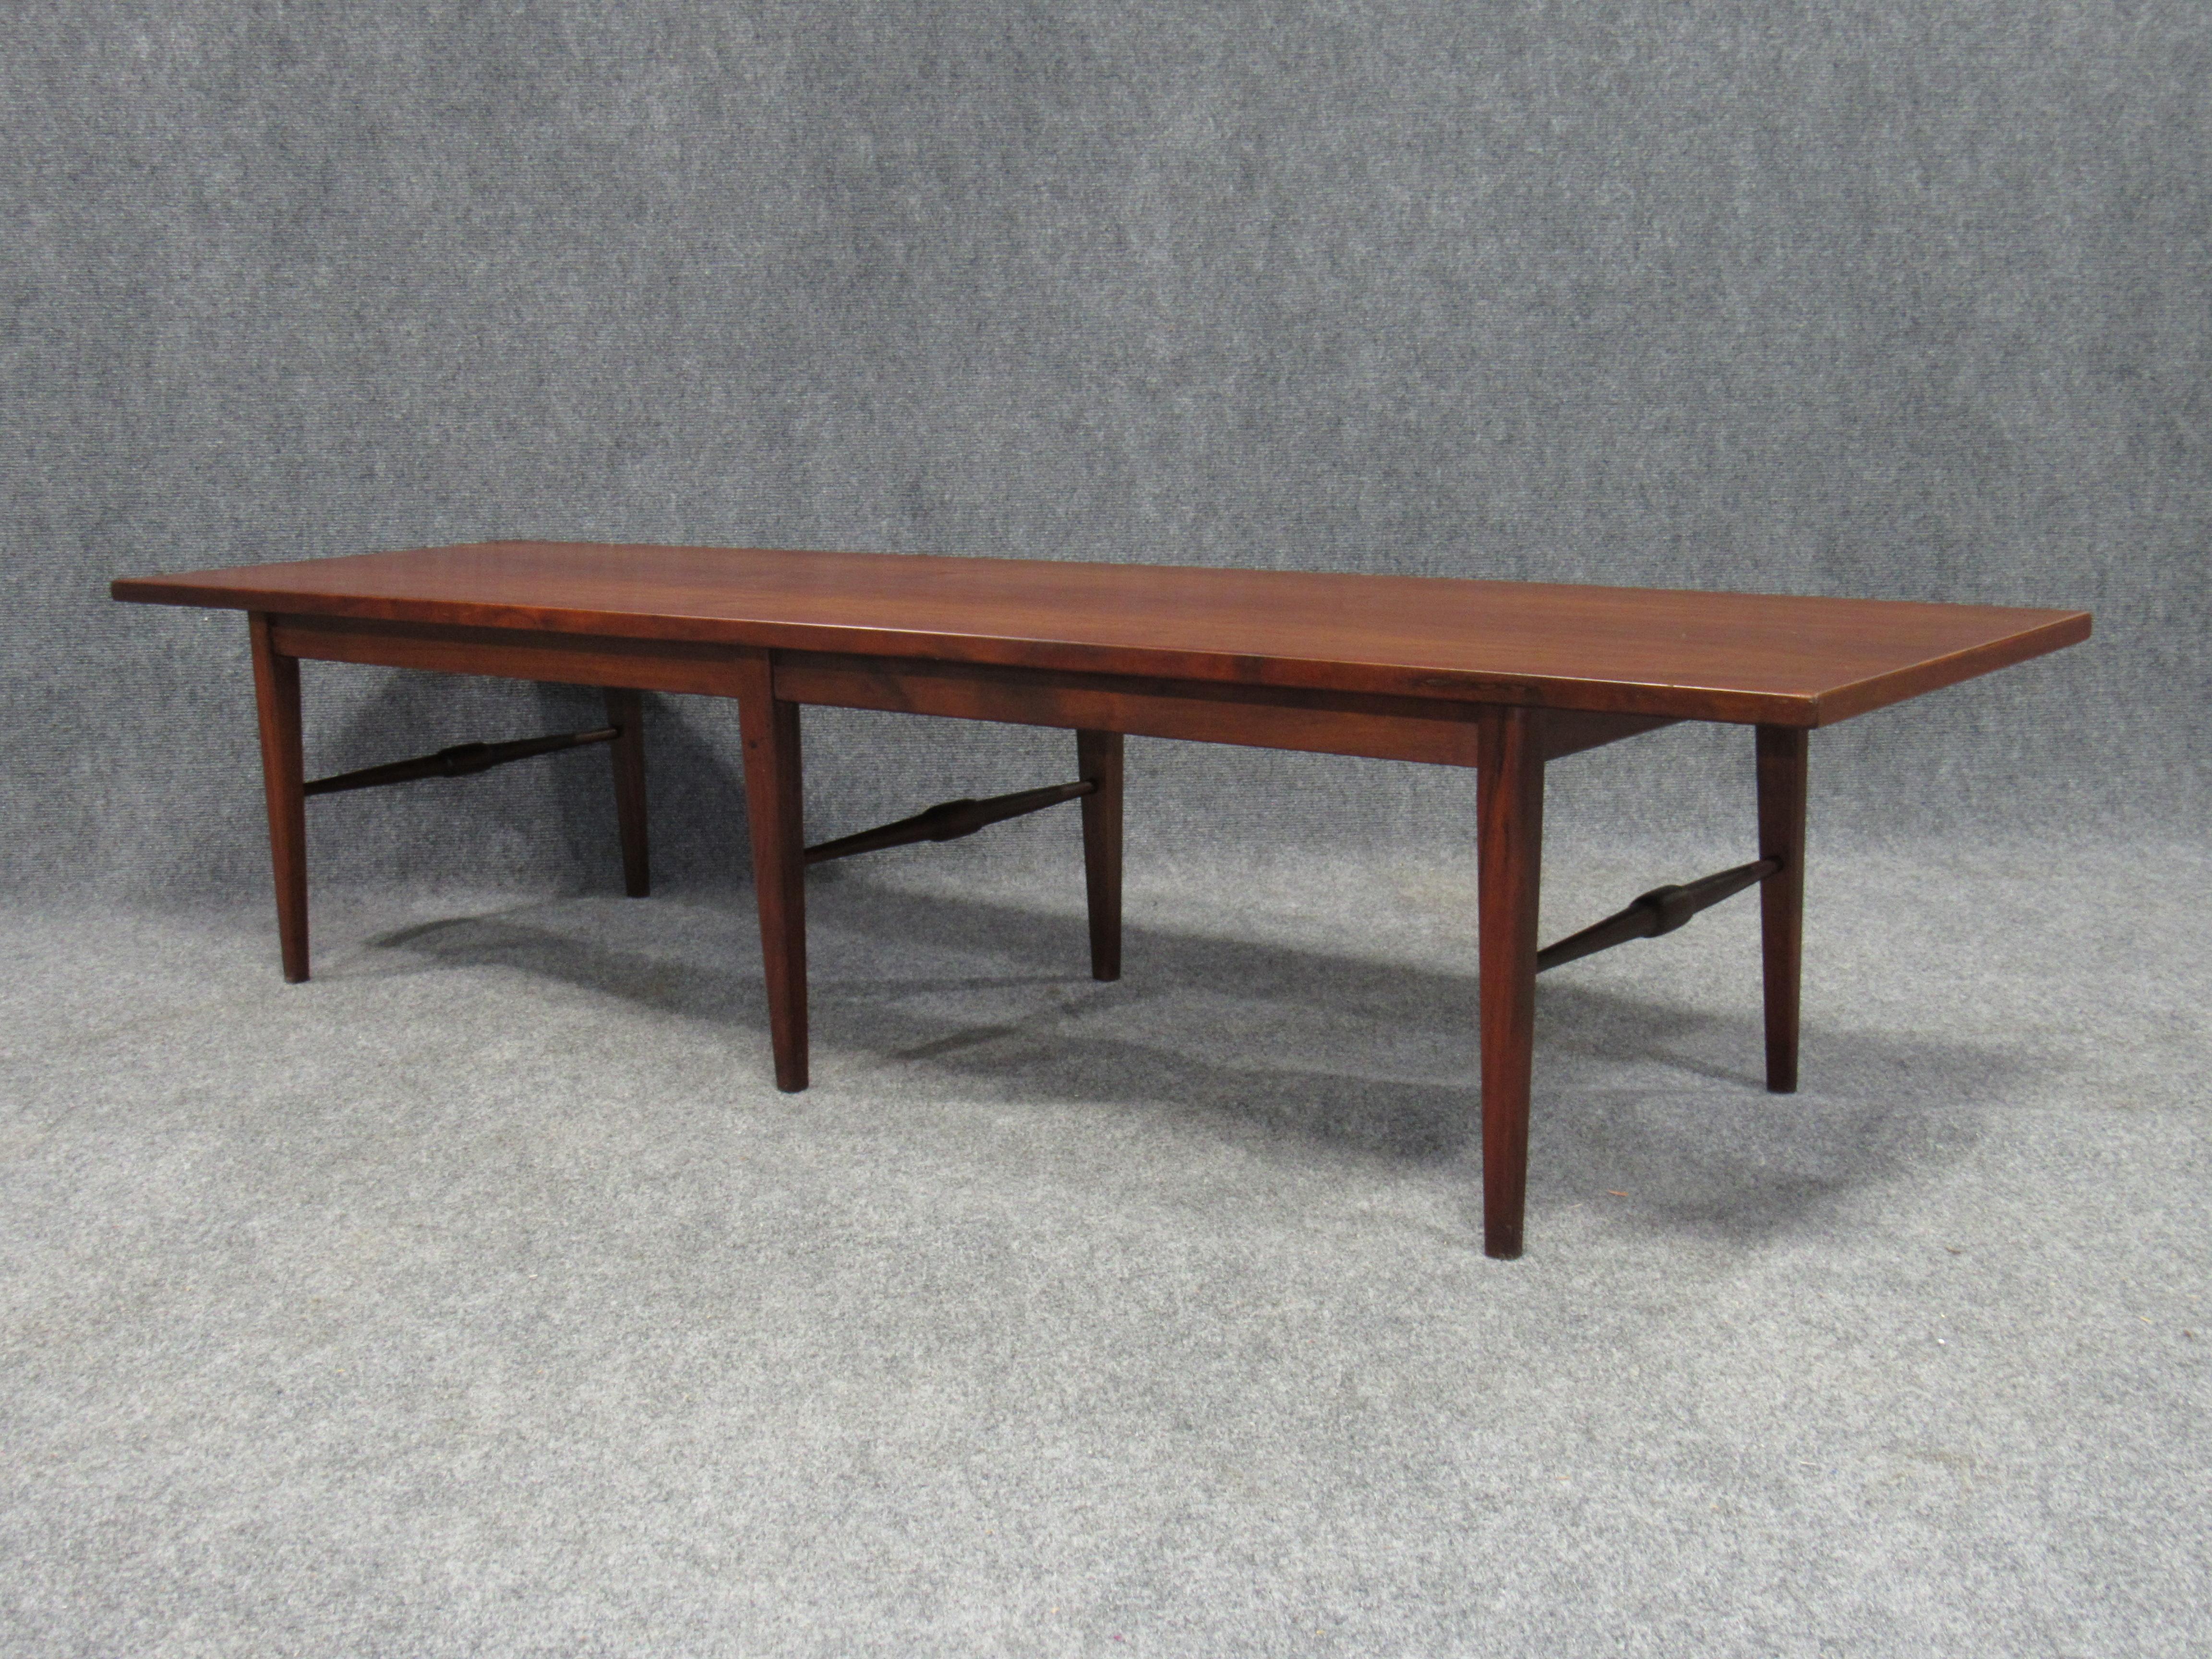 Danish Modern Six-Legged Rosewood Coffee Table In Good Condition For Sale In Belmont, MA